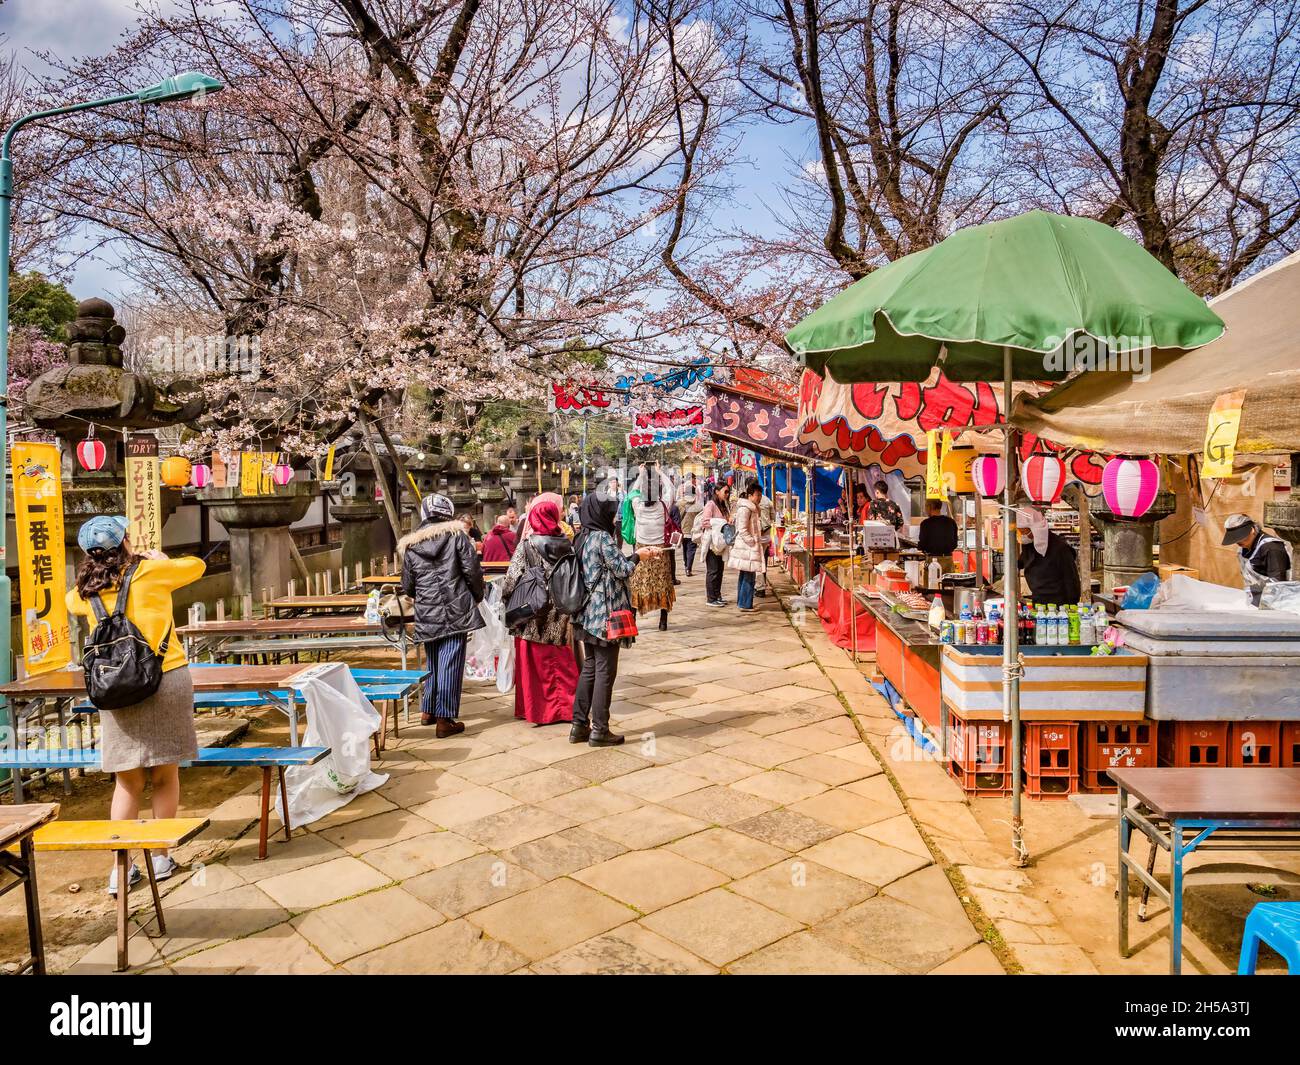 22 March 2019: Tokyo, Japan - Food stalls along the approach to the Ueno Toshogu Shinto Shrine in Ueno Onshi Park, Tokyo, in spring. Stock Photo